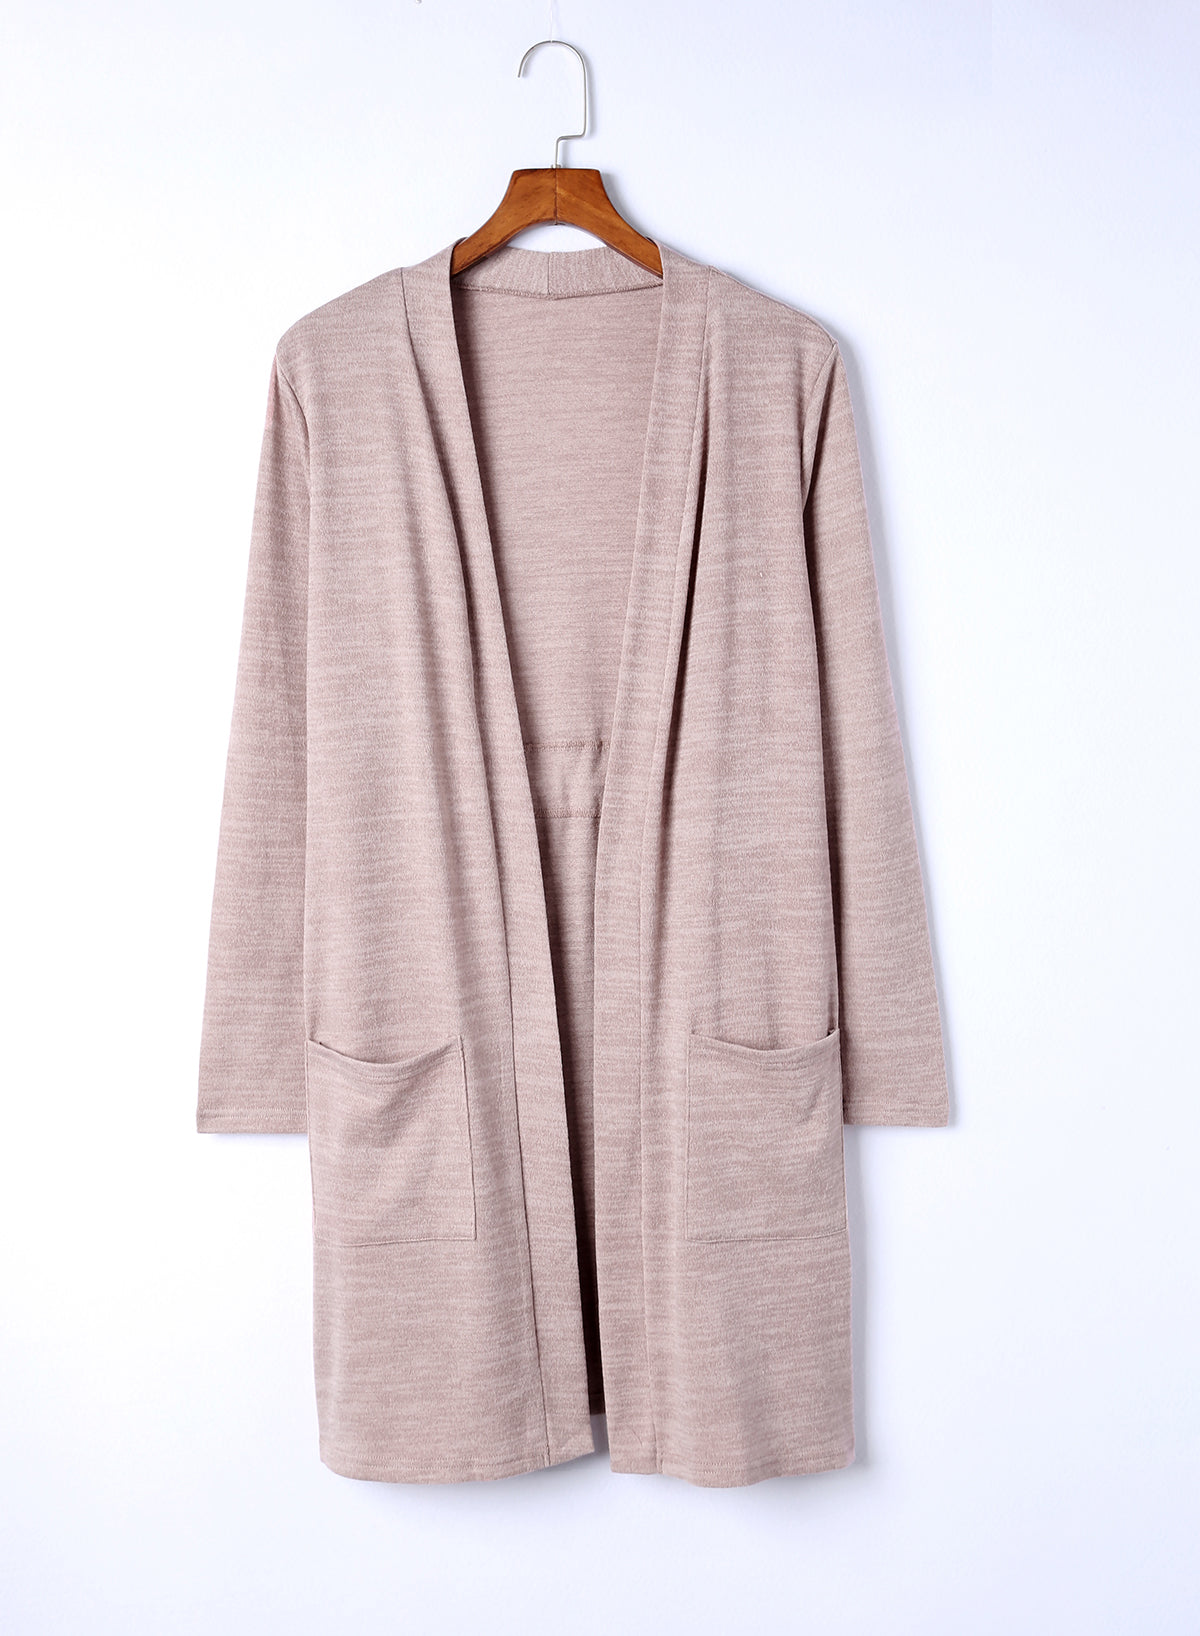 Long Sleeve Open Front Cardigan with Pocket - Women’s Clothing & Accessories - Shirts & Tops - 4 - 2024